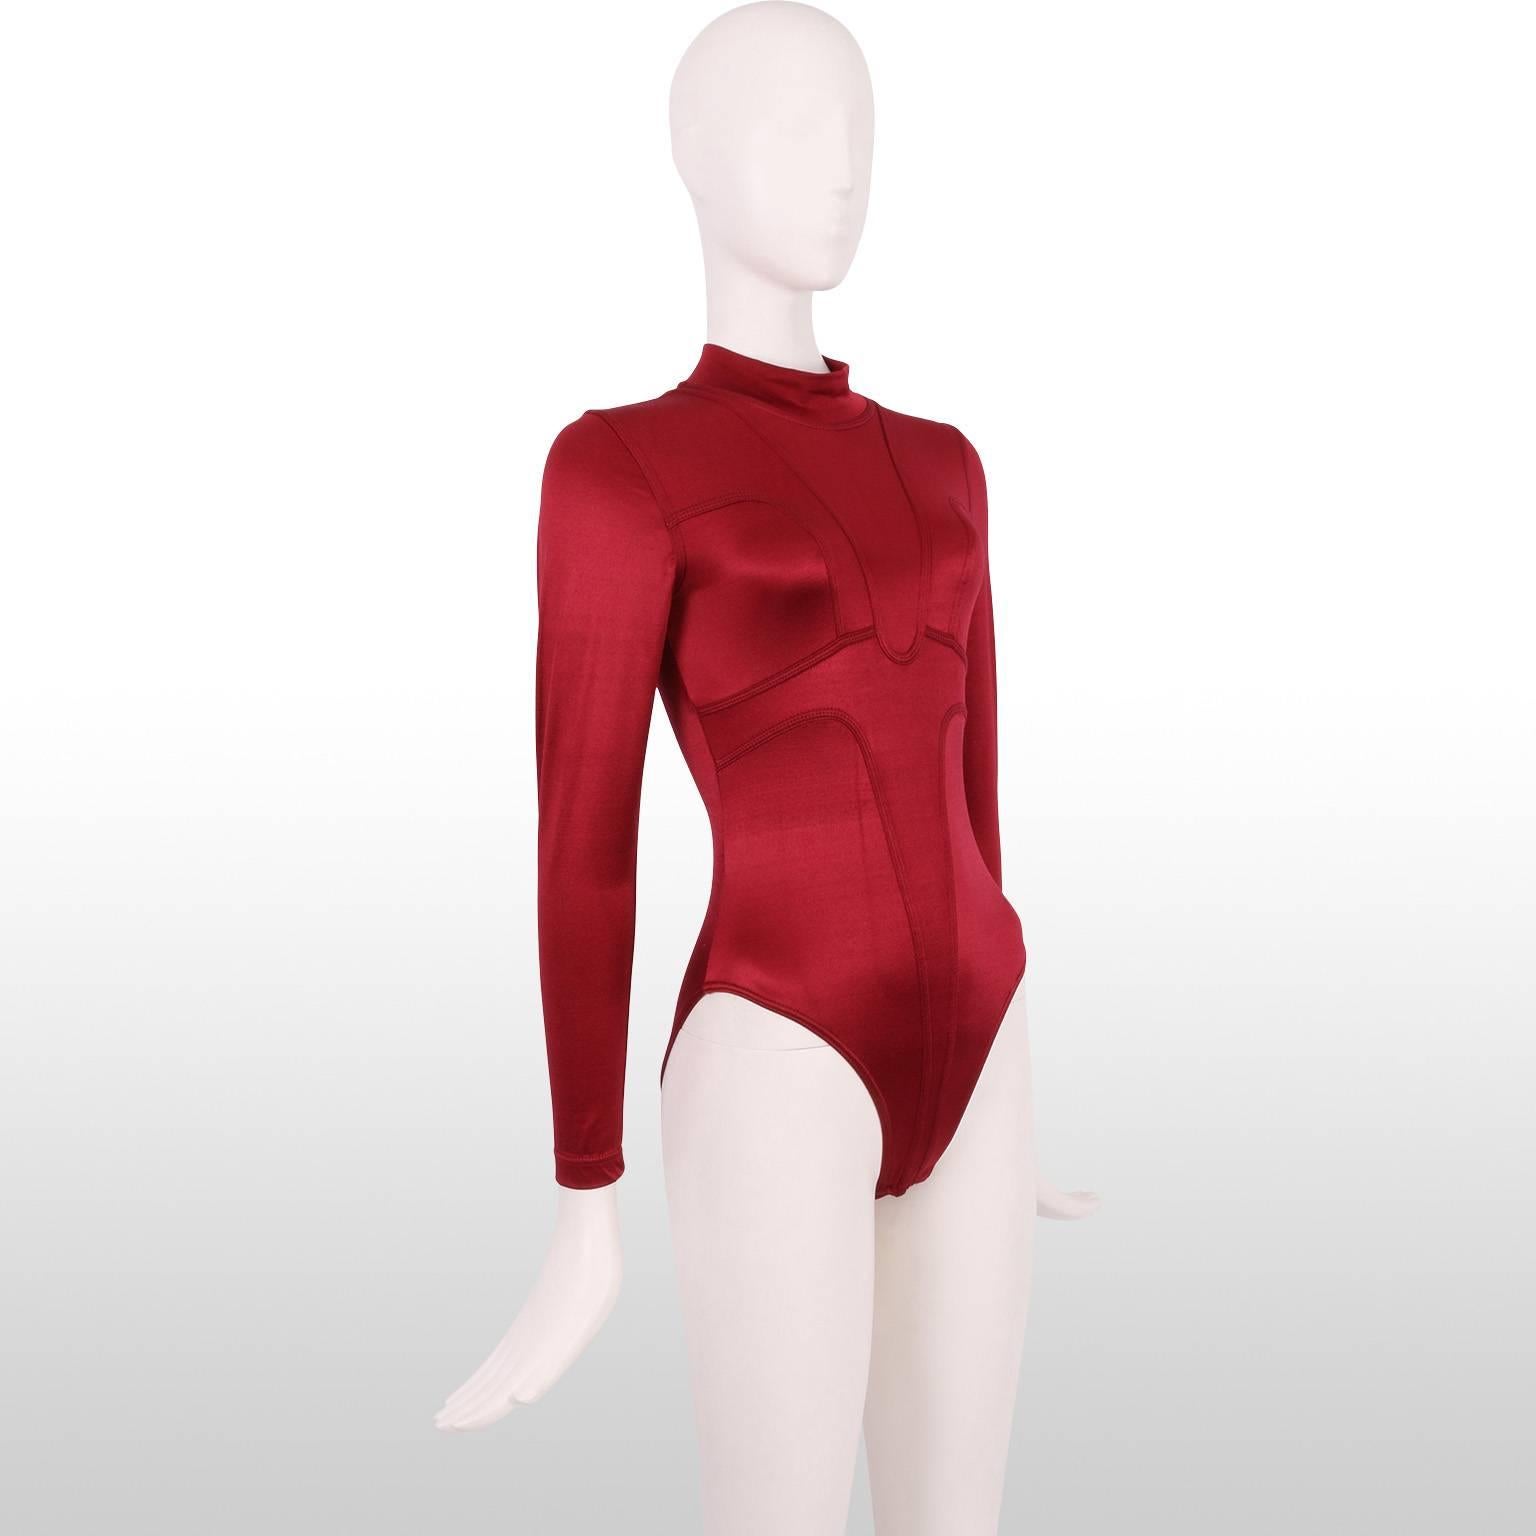 A clubwear classic from the 1980s by Chrissie Walsh. This ruby red body suit has a metallic/satin sheen to it and features Tron-like futuristic detailing and a mock turtleneck. It is in mint condition and ready to be worn. 
Measurements:
Length